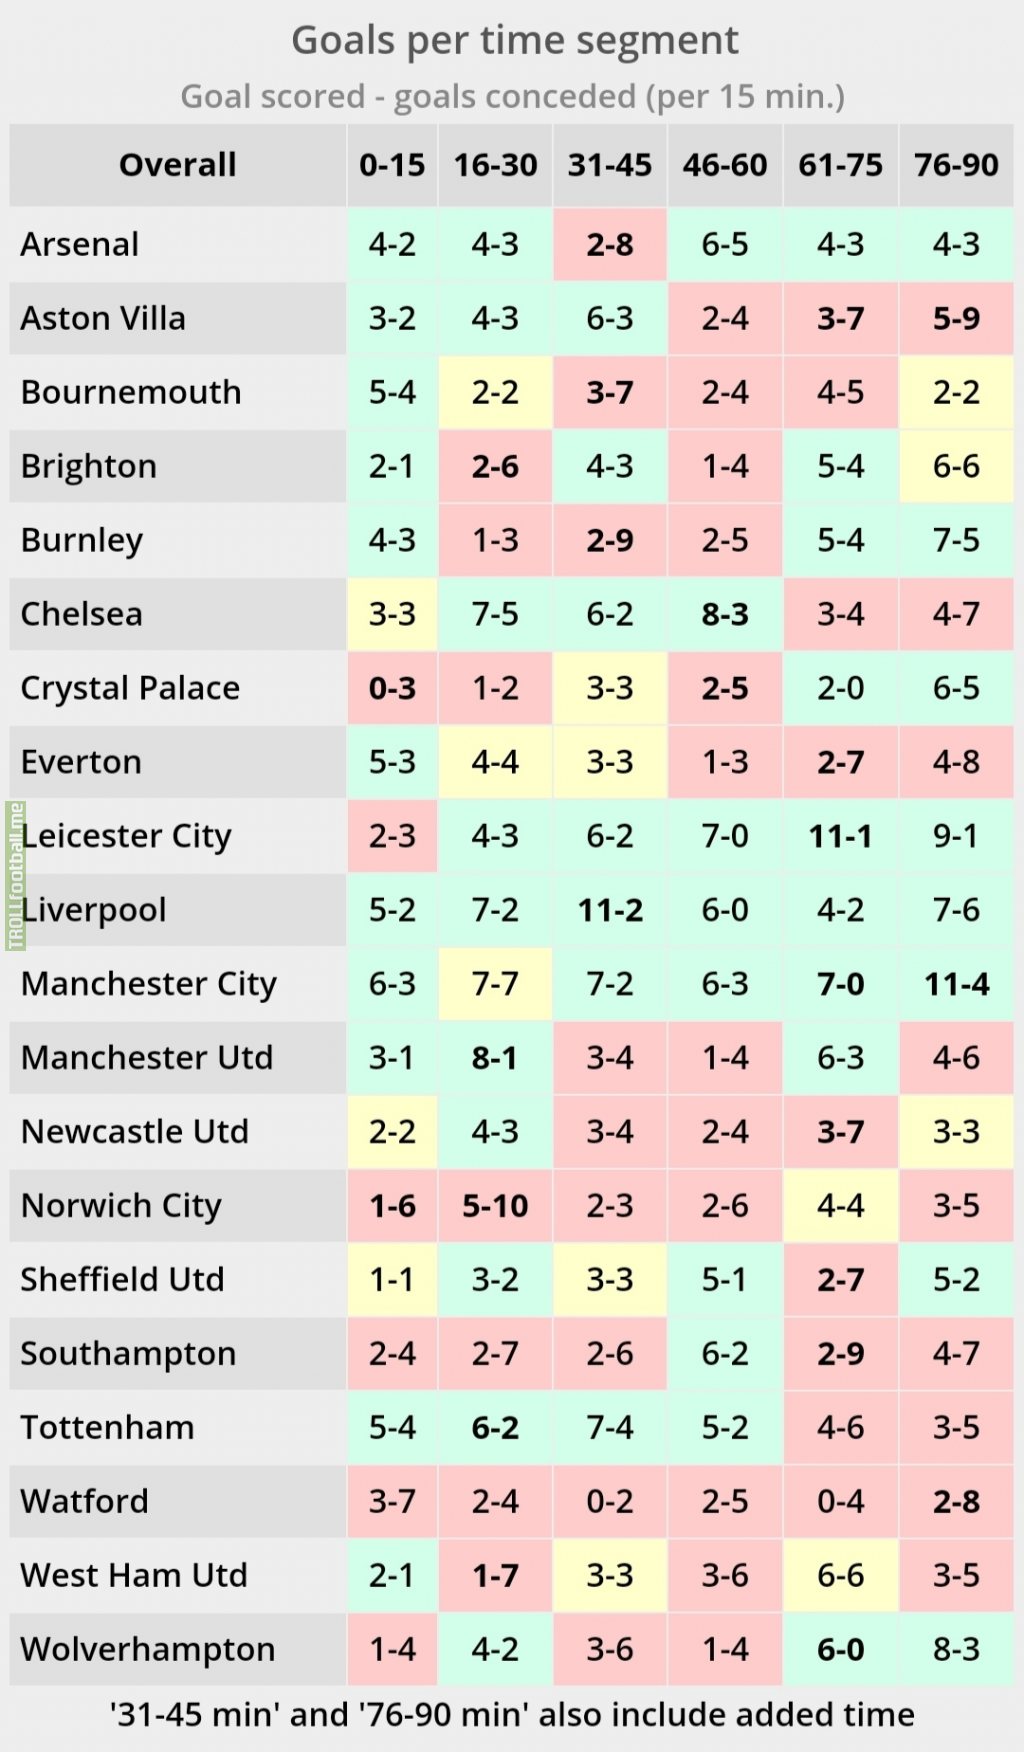 Goals scored-conceded per 15 minutes time segments in the league.